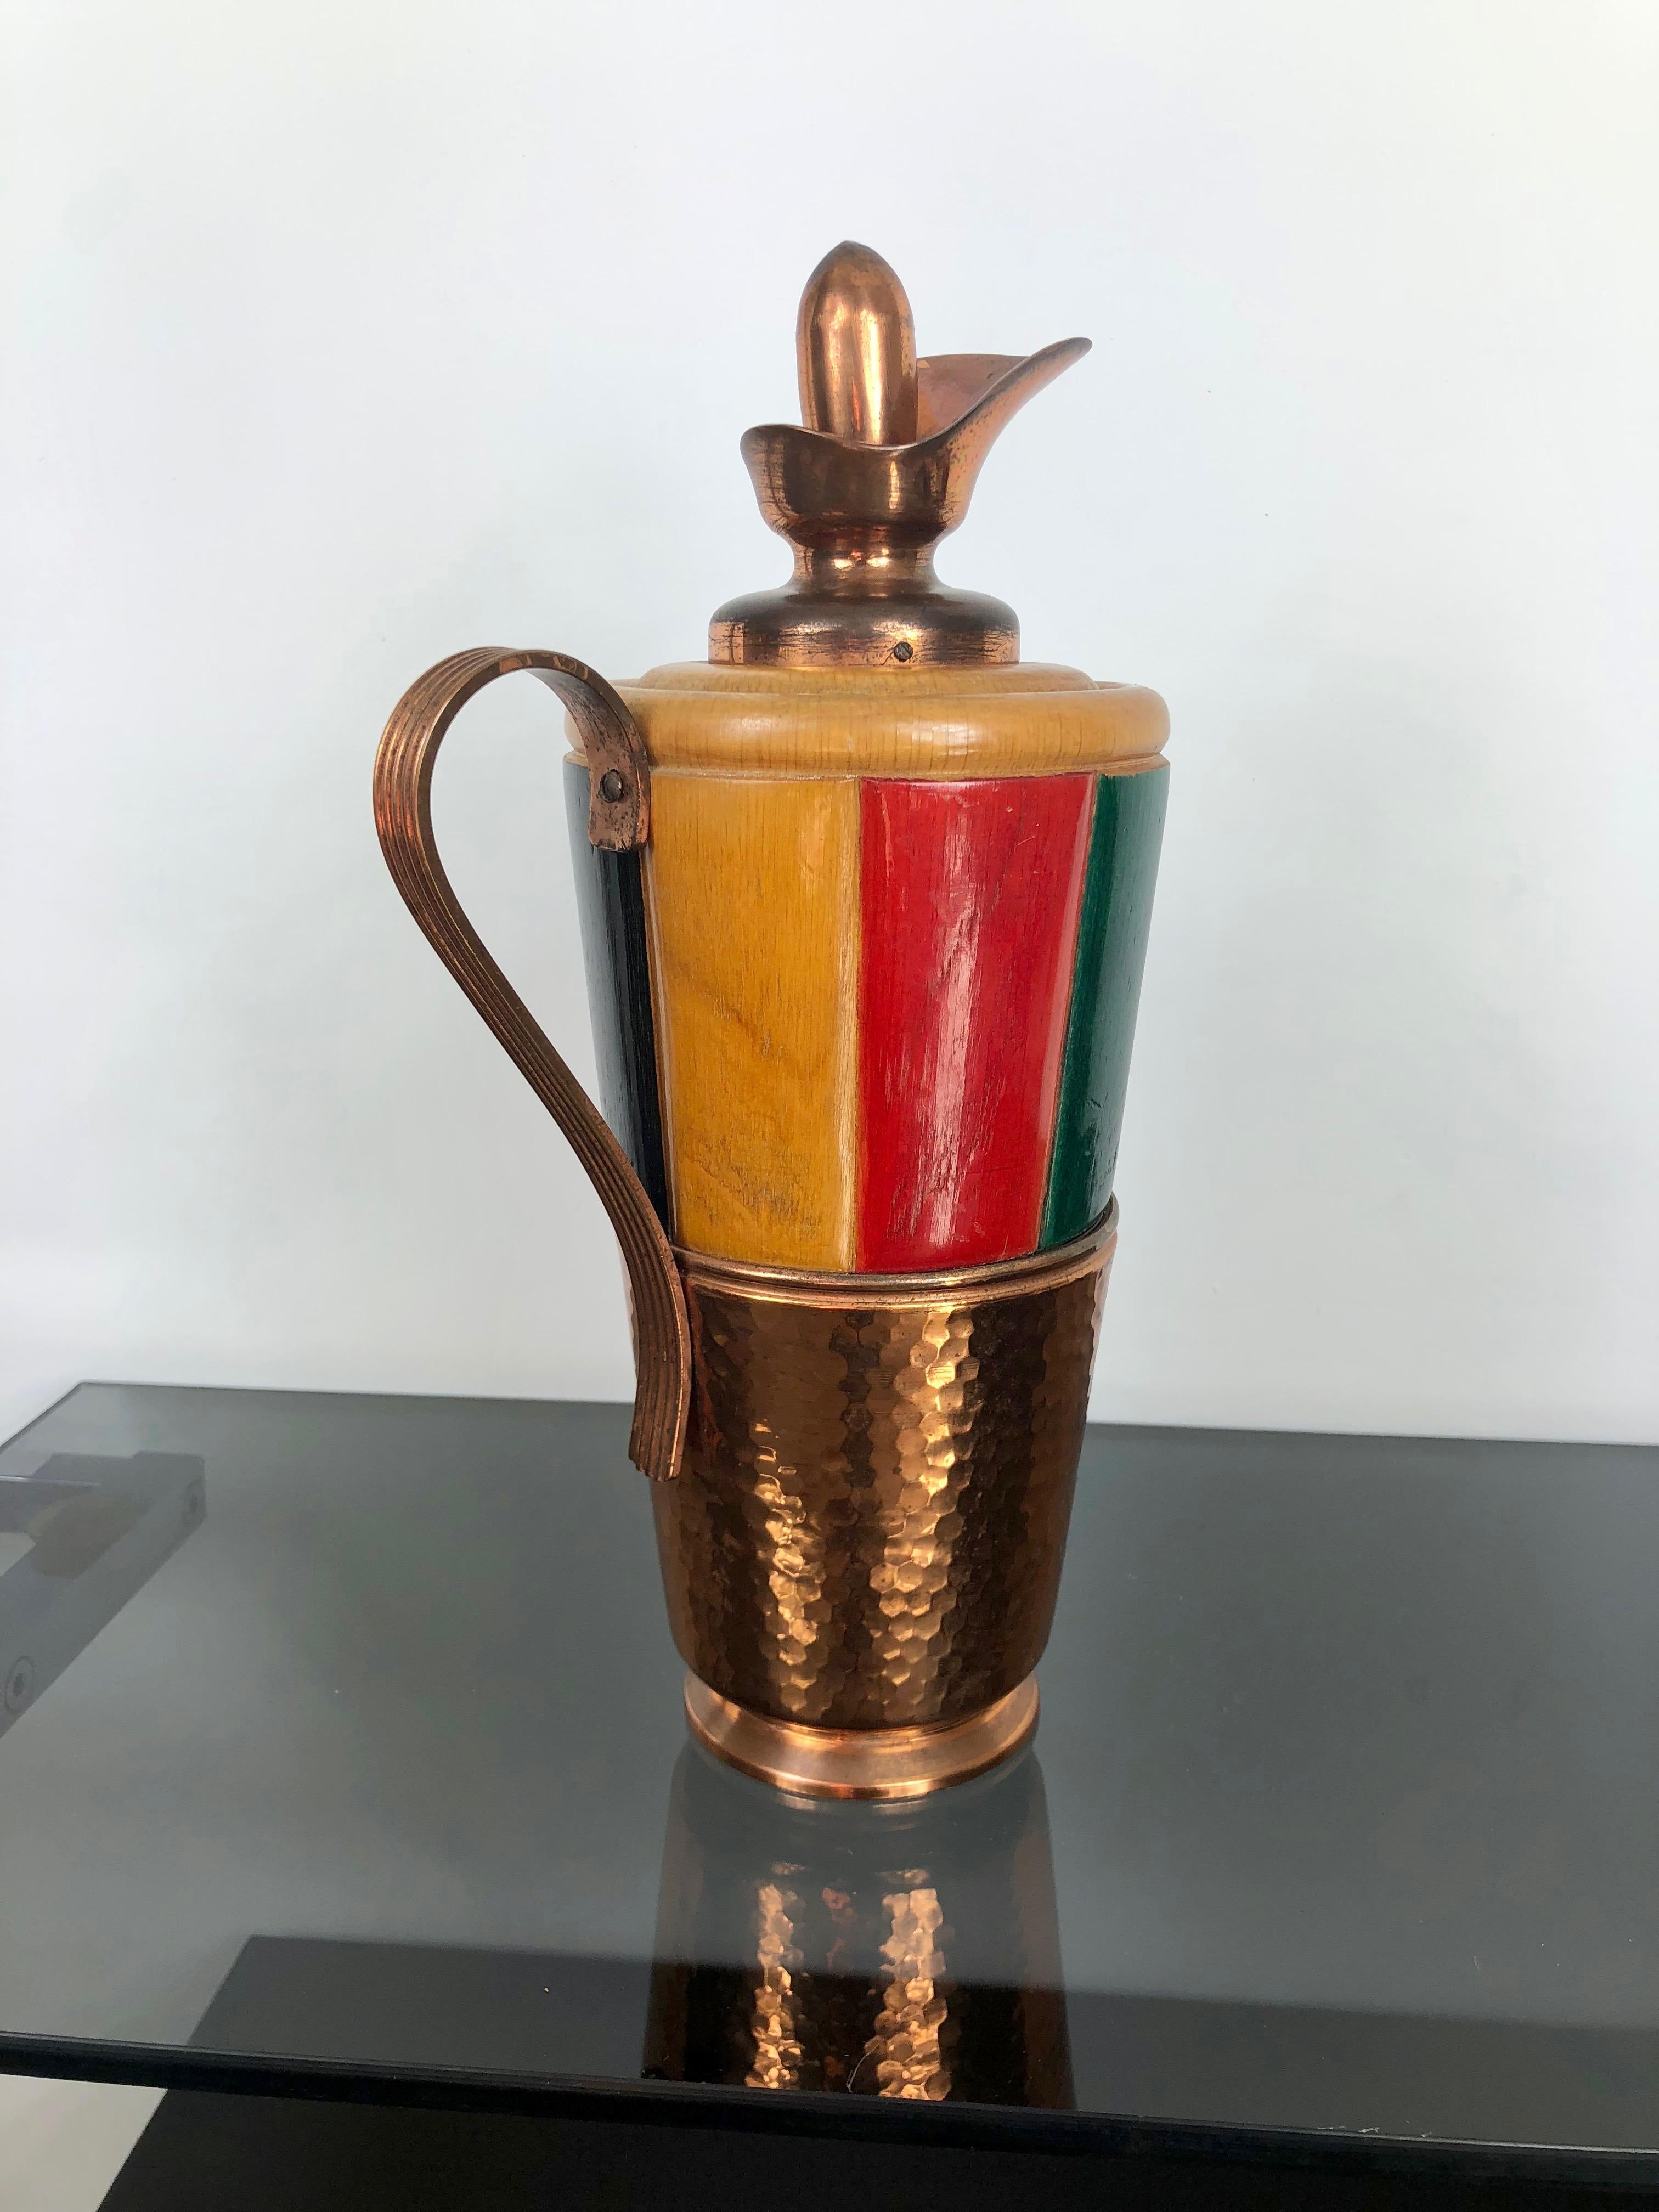 Thermos/decanter/pitcher by the Italian Aldo Tura for Macabo made of colored (red, green and black) wood and copper. 
The stamp is engraved on the bottom.